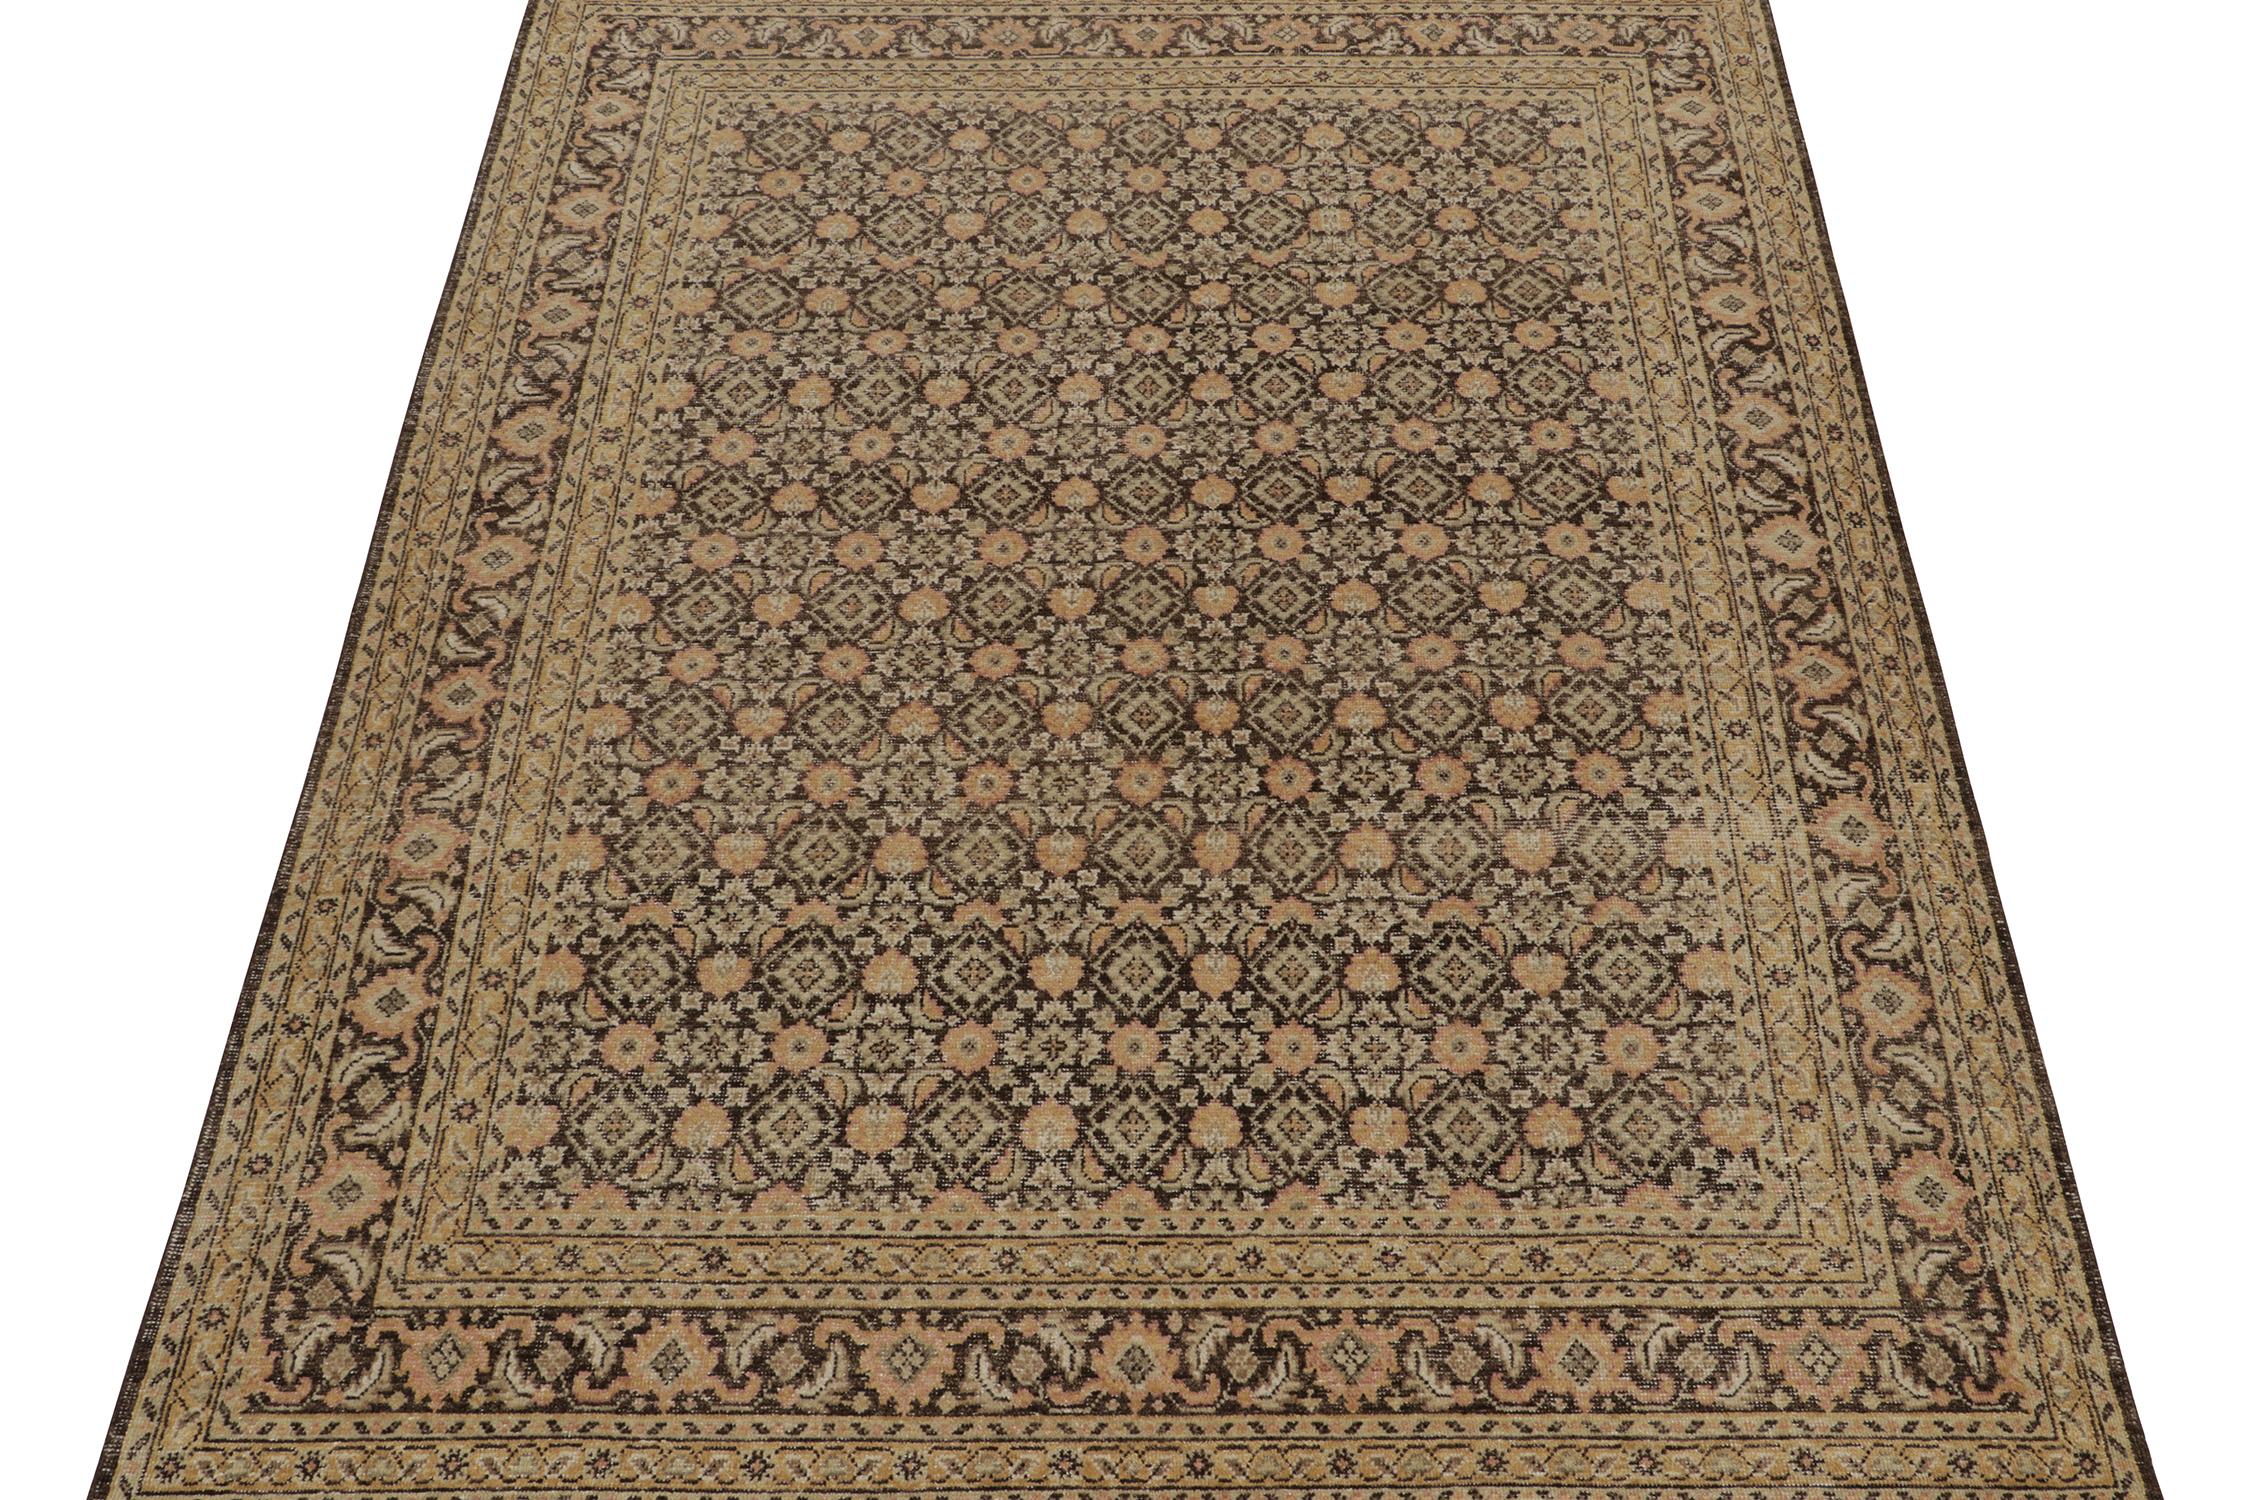 Indian Rug & Kilim’s Distressed Persian Style Rug in Brown and Gold Floral Patterns For Sale